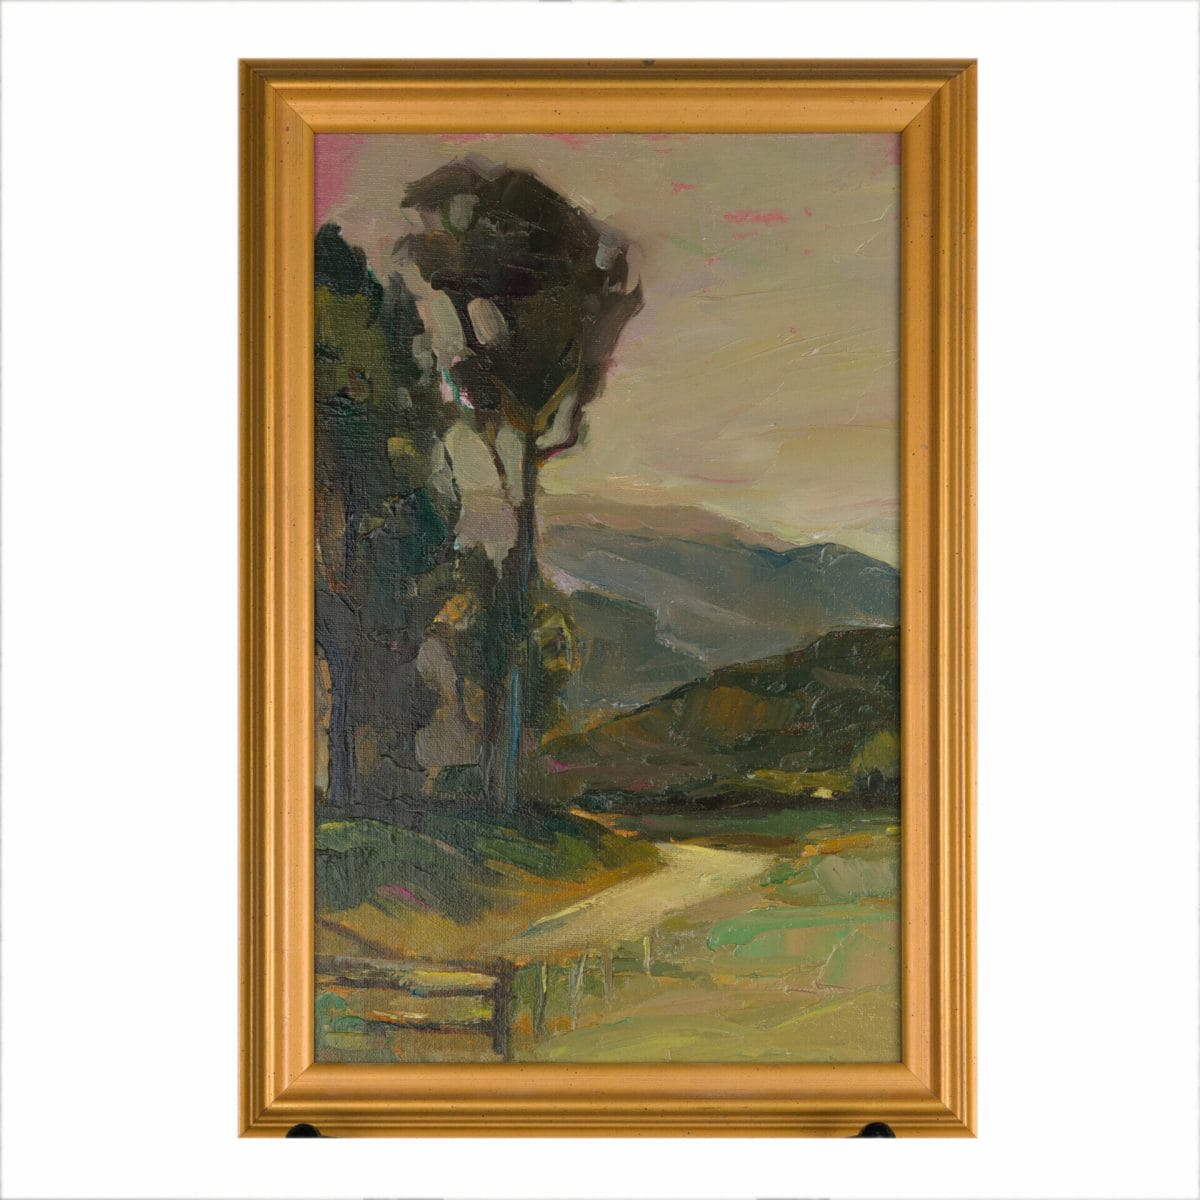 Paintig by Si Chen Yuan Carmel Valley Offered for Auction by Fine Estate, Inc.